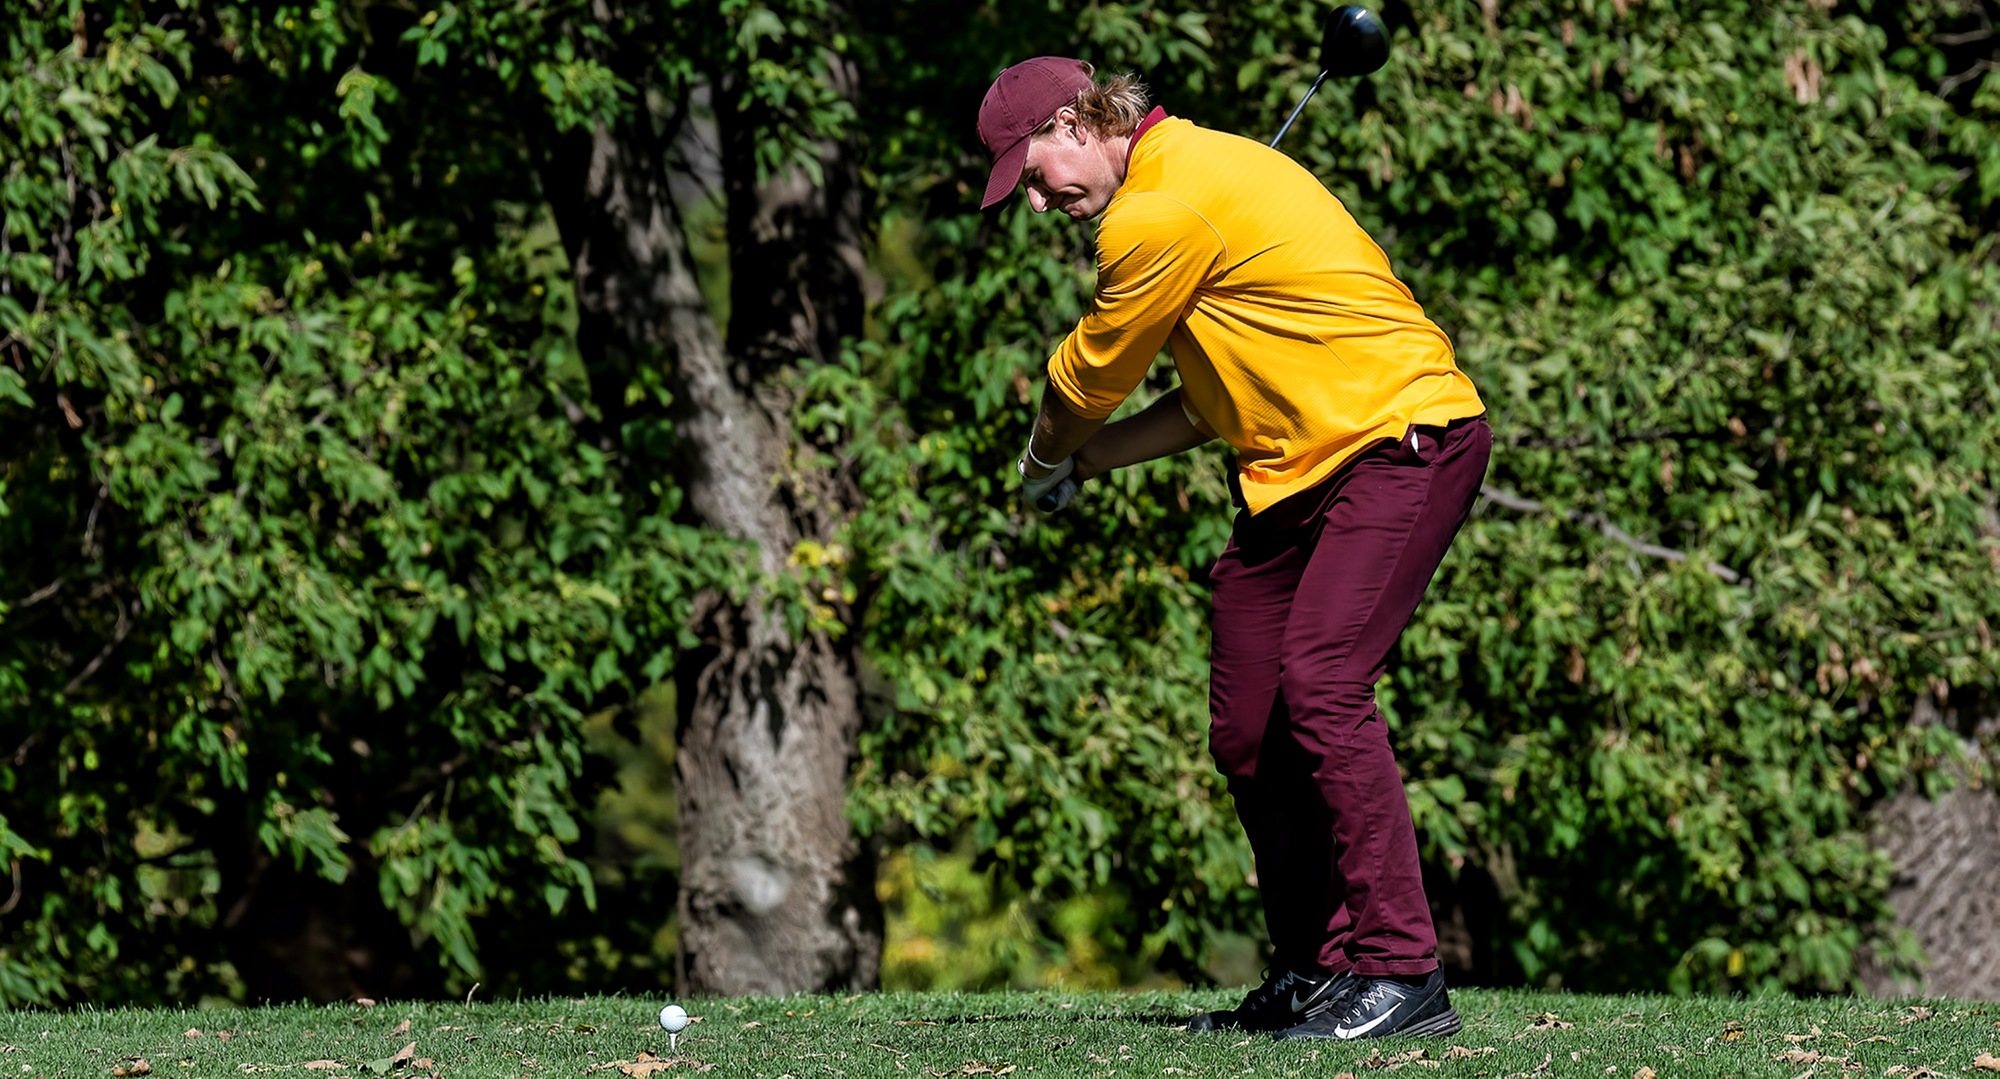 Senior Gage Stromme tees off during the first round at the MIAC Championship Meet. He is tied for the lead after 18 holes of play.